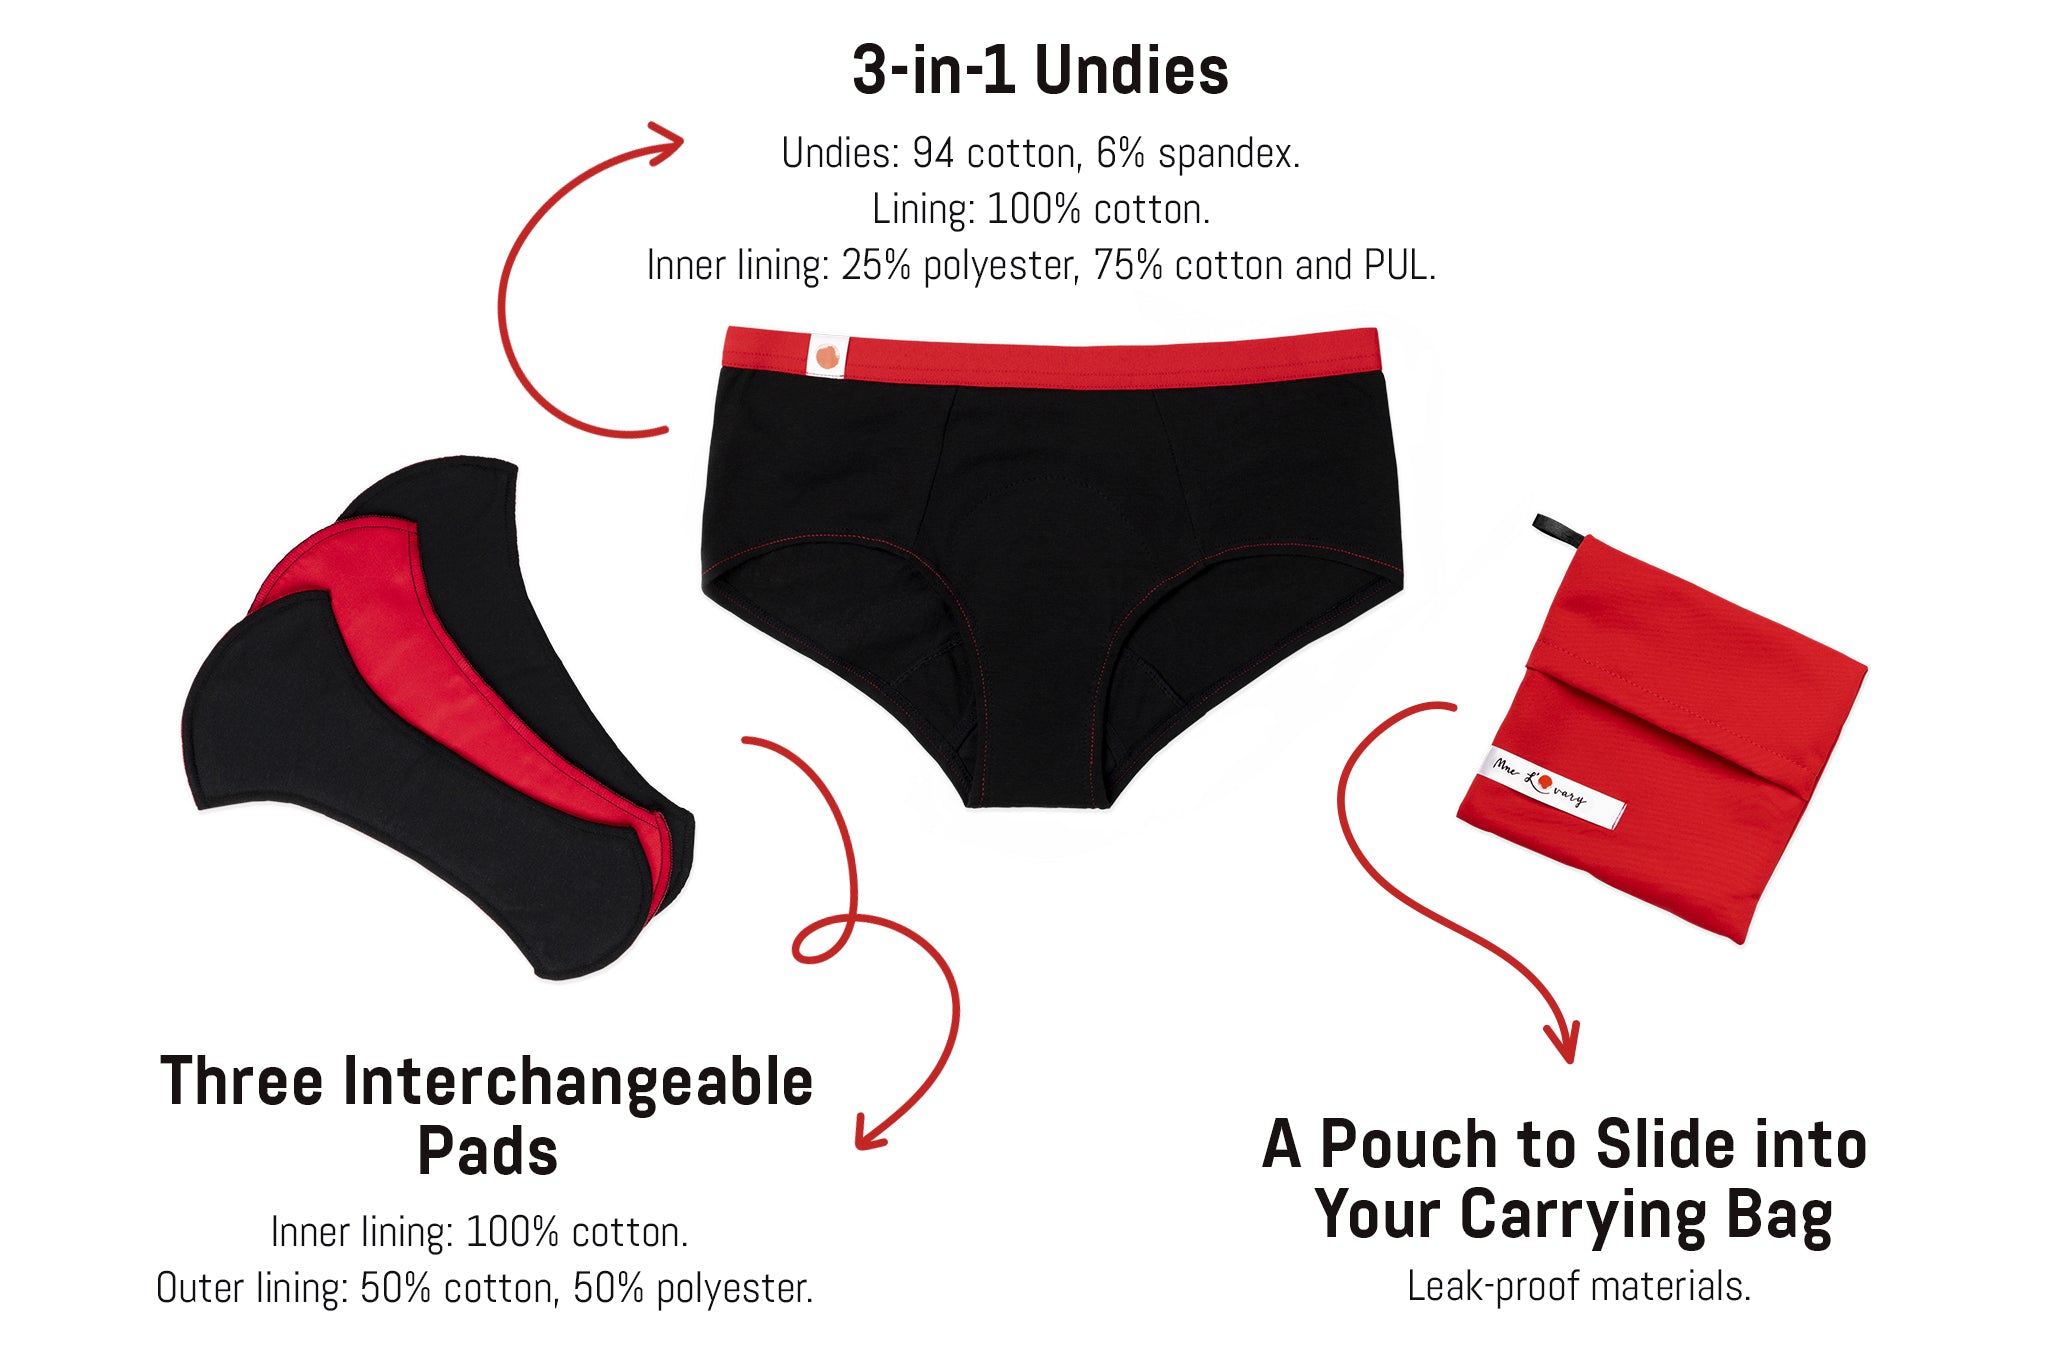 What to Know About PFAS in Thinx and Other Period Underwear